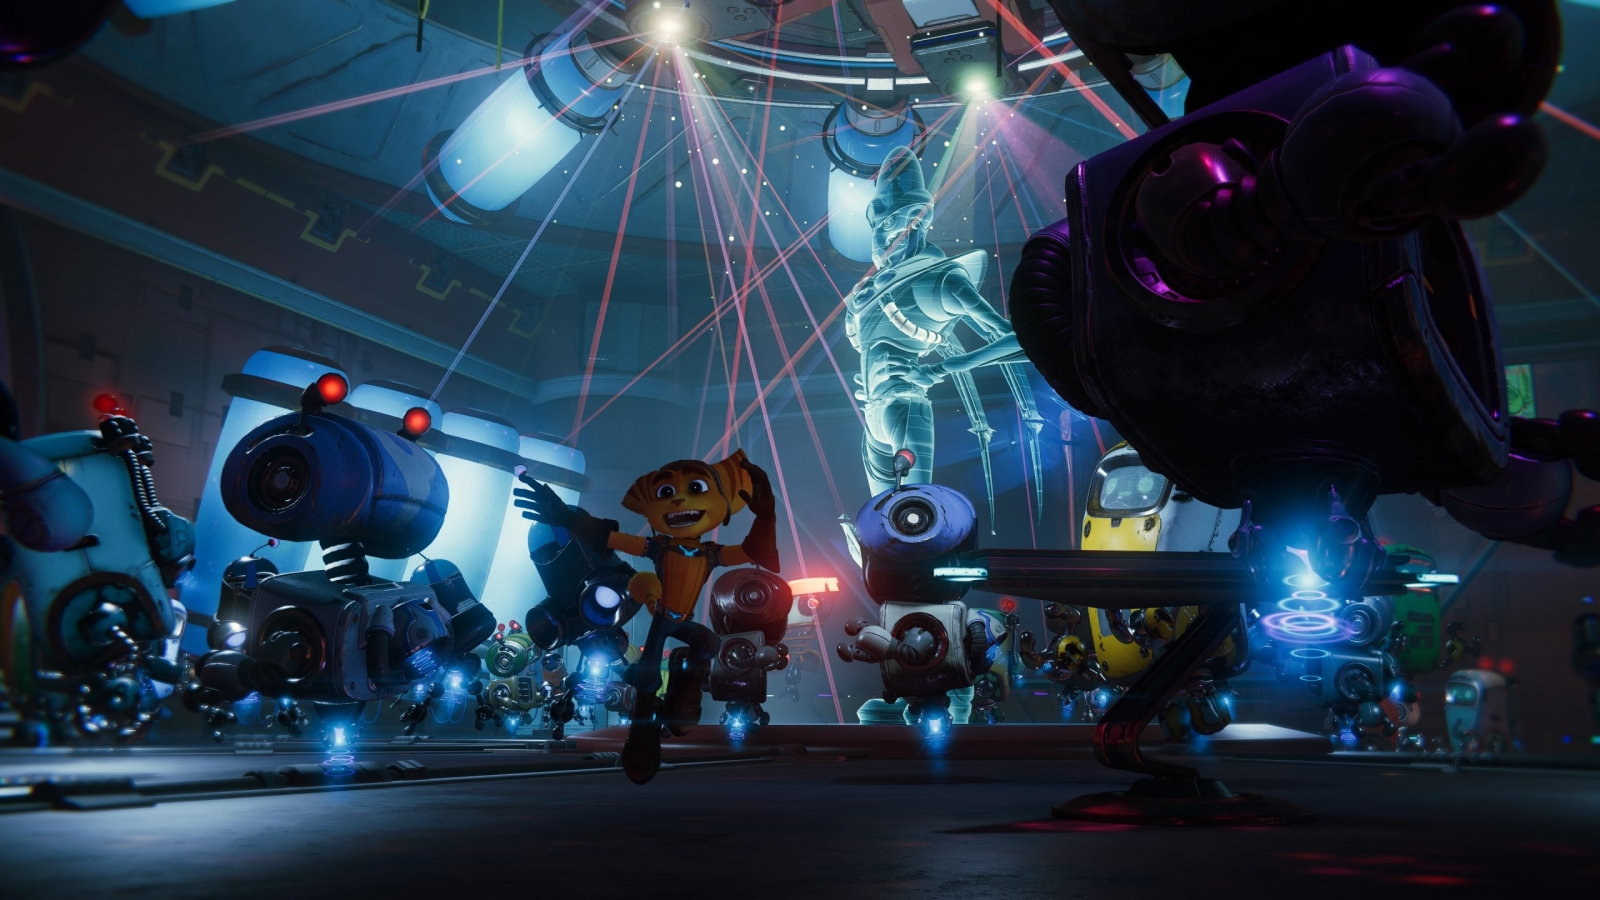 How Ratchet & Clank: Rift Apart is bringing Pixar magic to the PS5